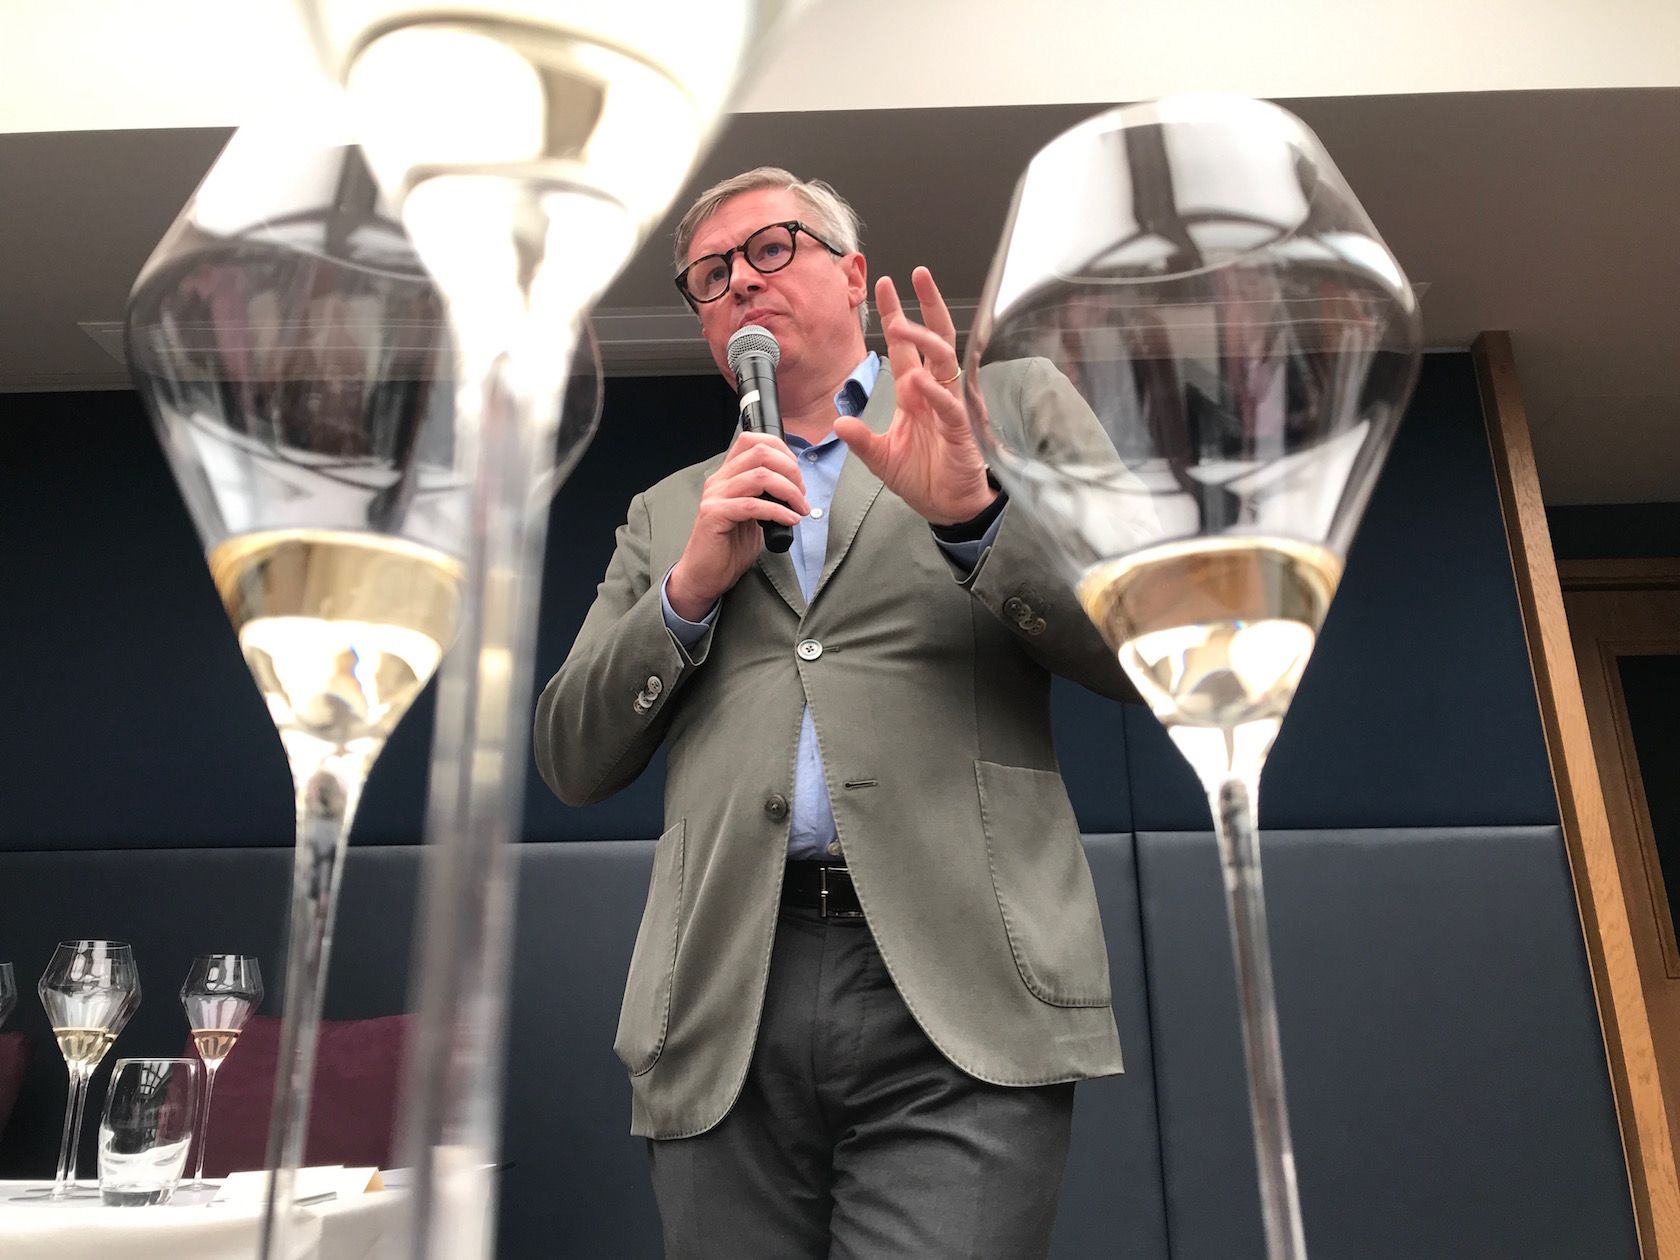 Roederer’s Lécaillon on ‘Fighting for Freshness’ in Champagne